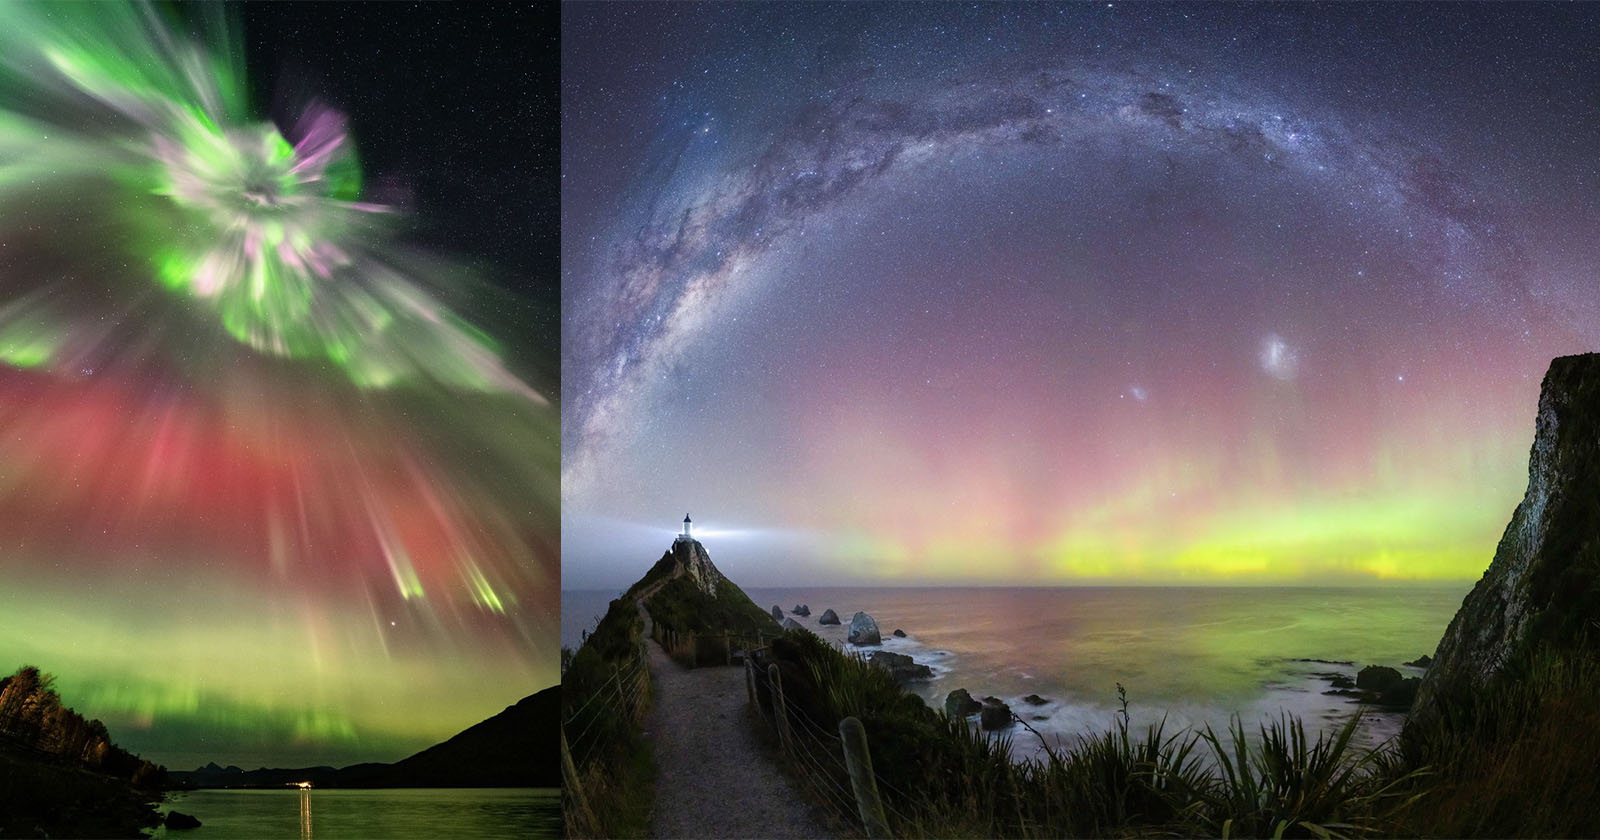 The incredible Aurora Borealis and where to find them this winter!